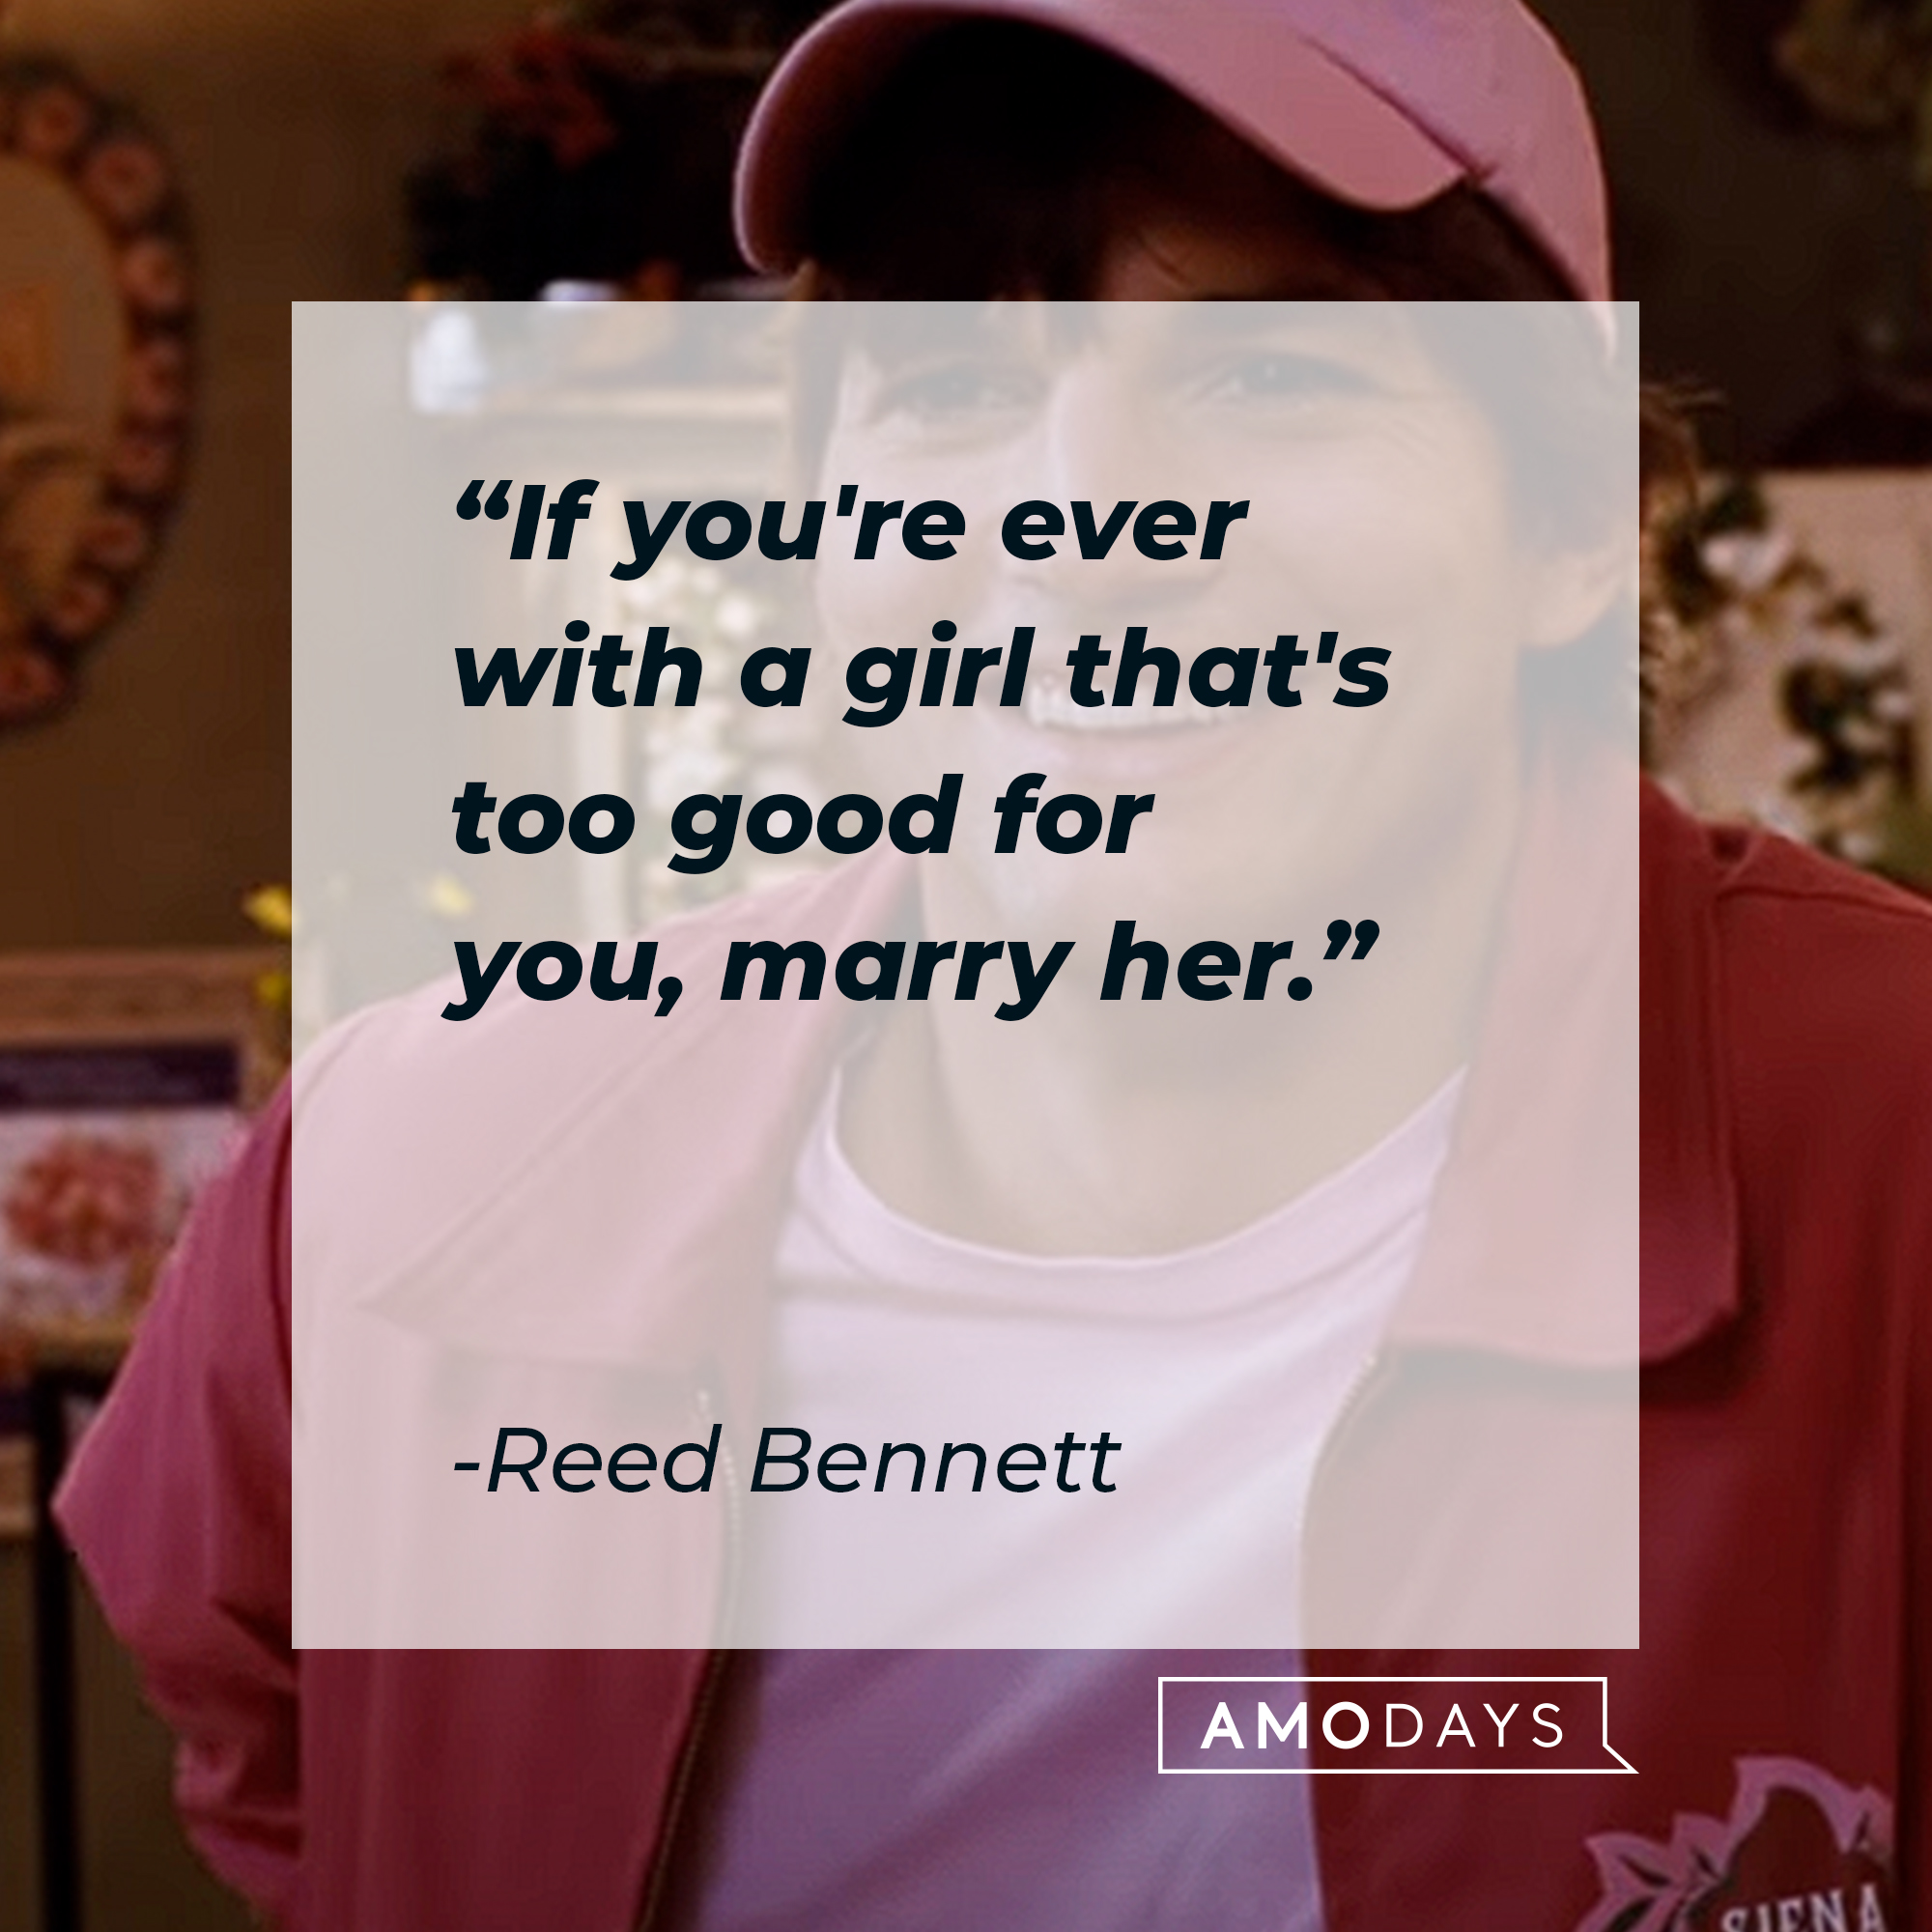 Reed Bennett's quote: "If you're ever with a girl that's good for you, marry her" | Source: Youtube.com/WarnerBrosPictures